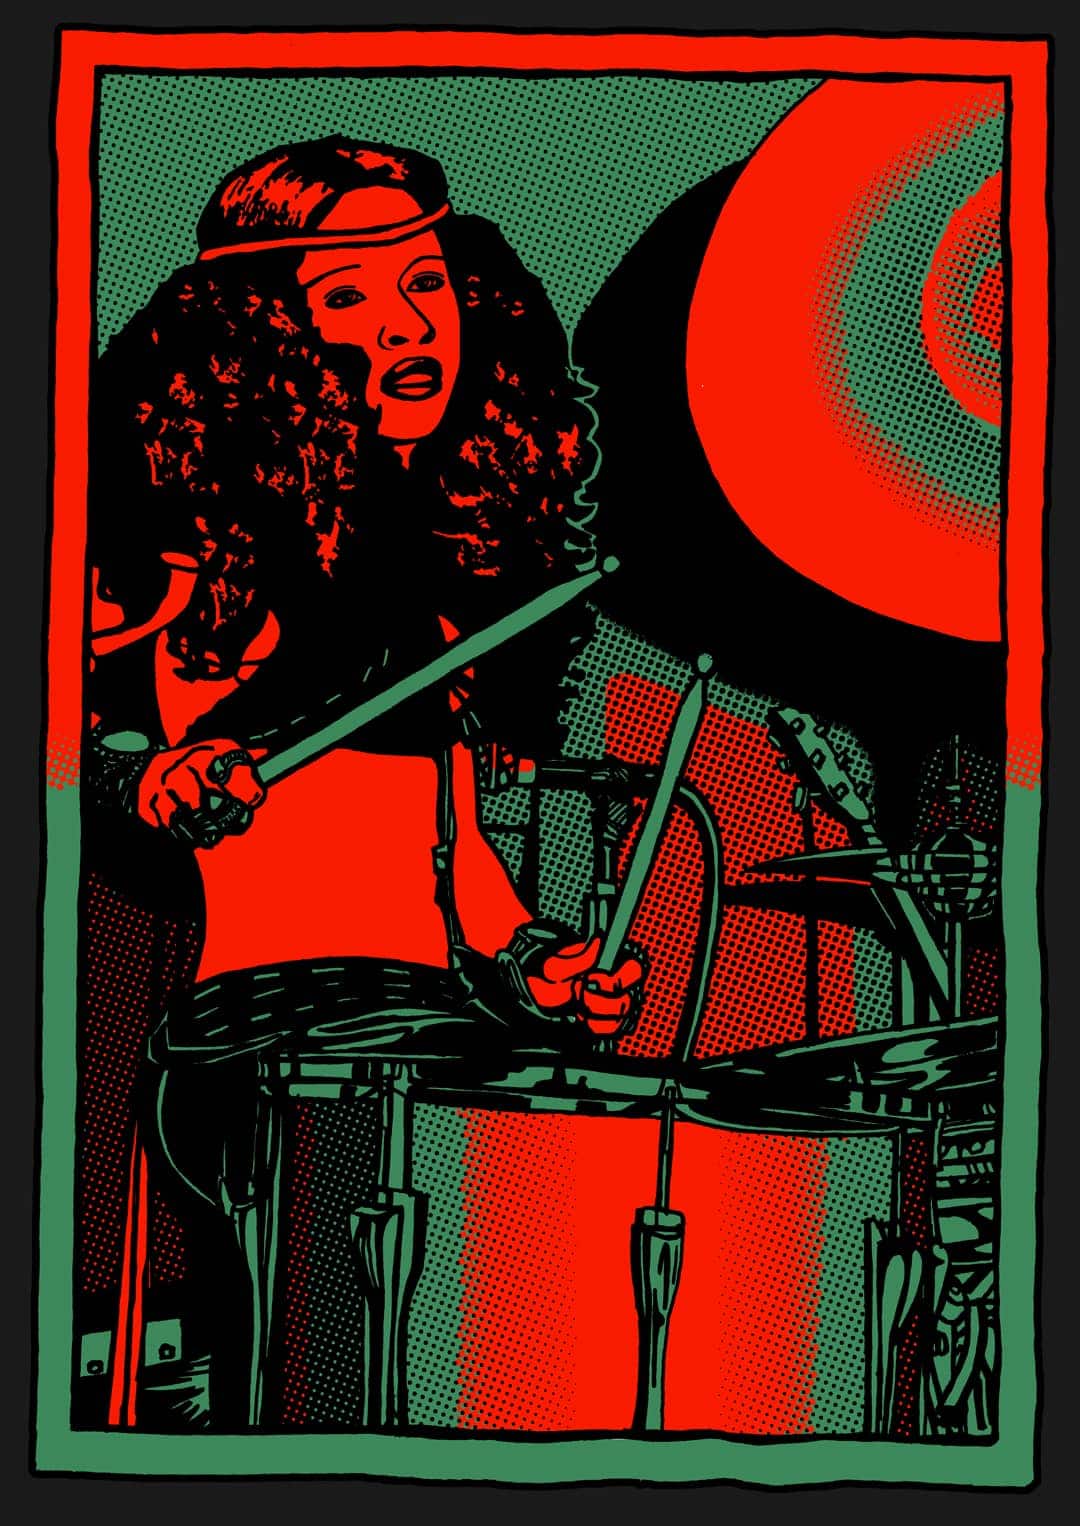 Chaka Khan playing the drums in the band Rufus art